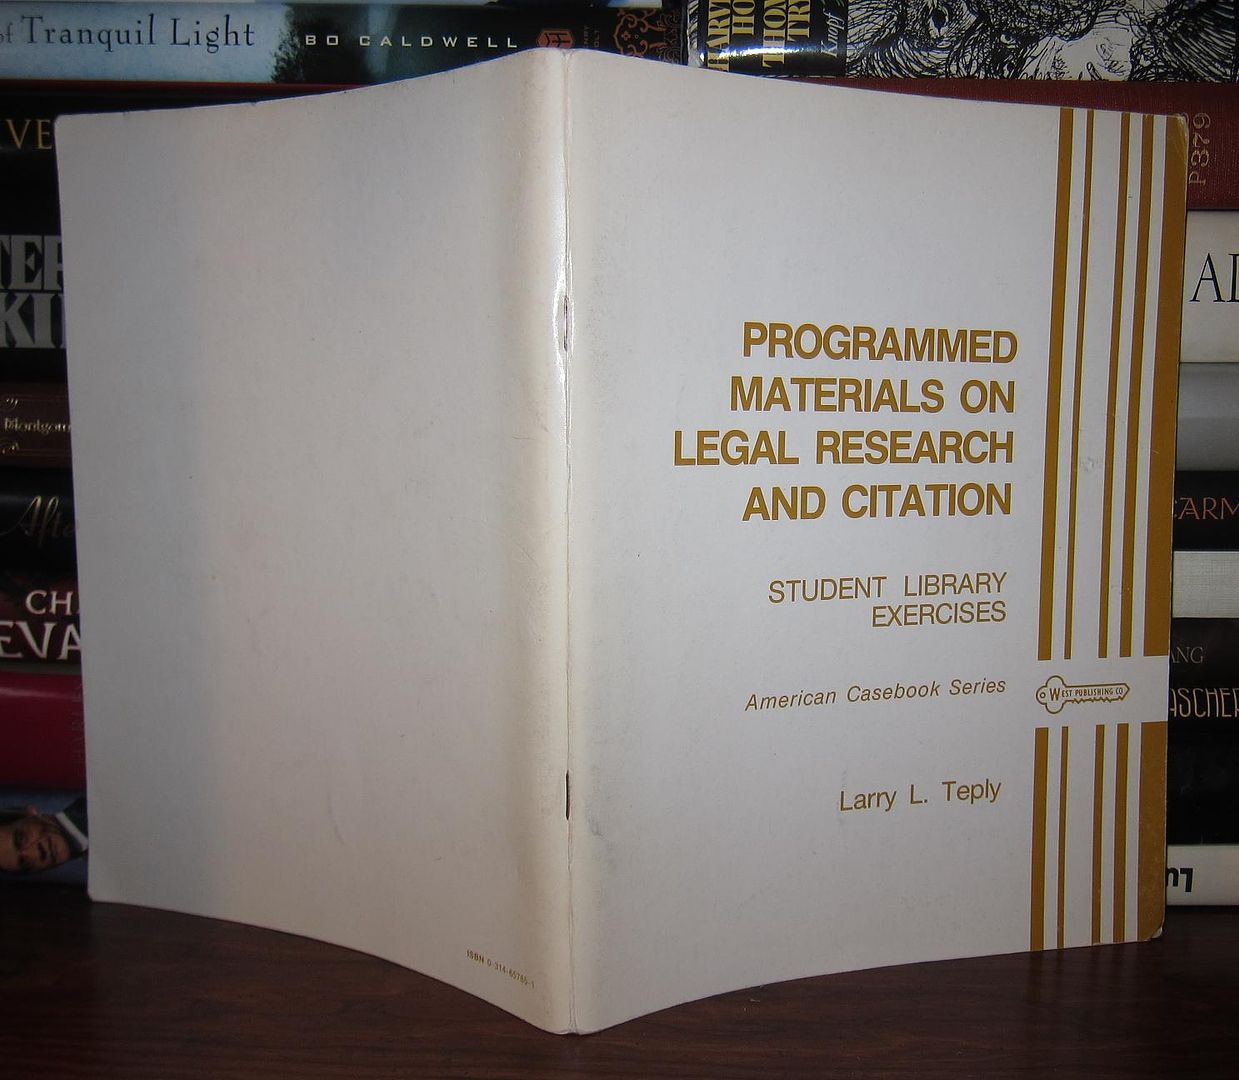 TEPLY, LARRY L. - Student Library Exercises to Accompany Programmed Materials on Legal Research and Citation